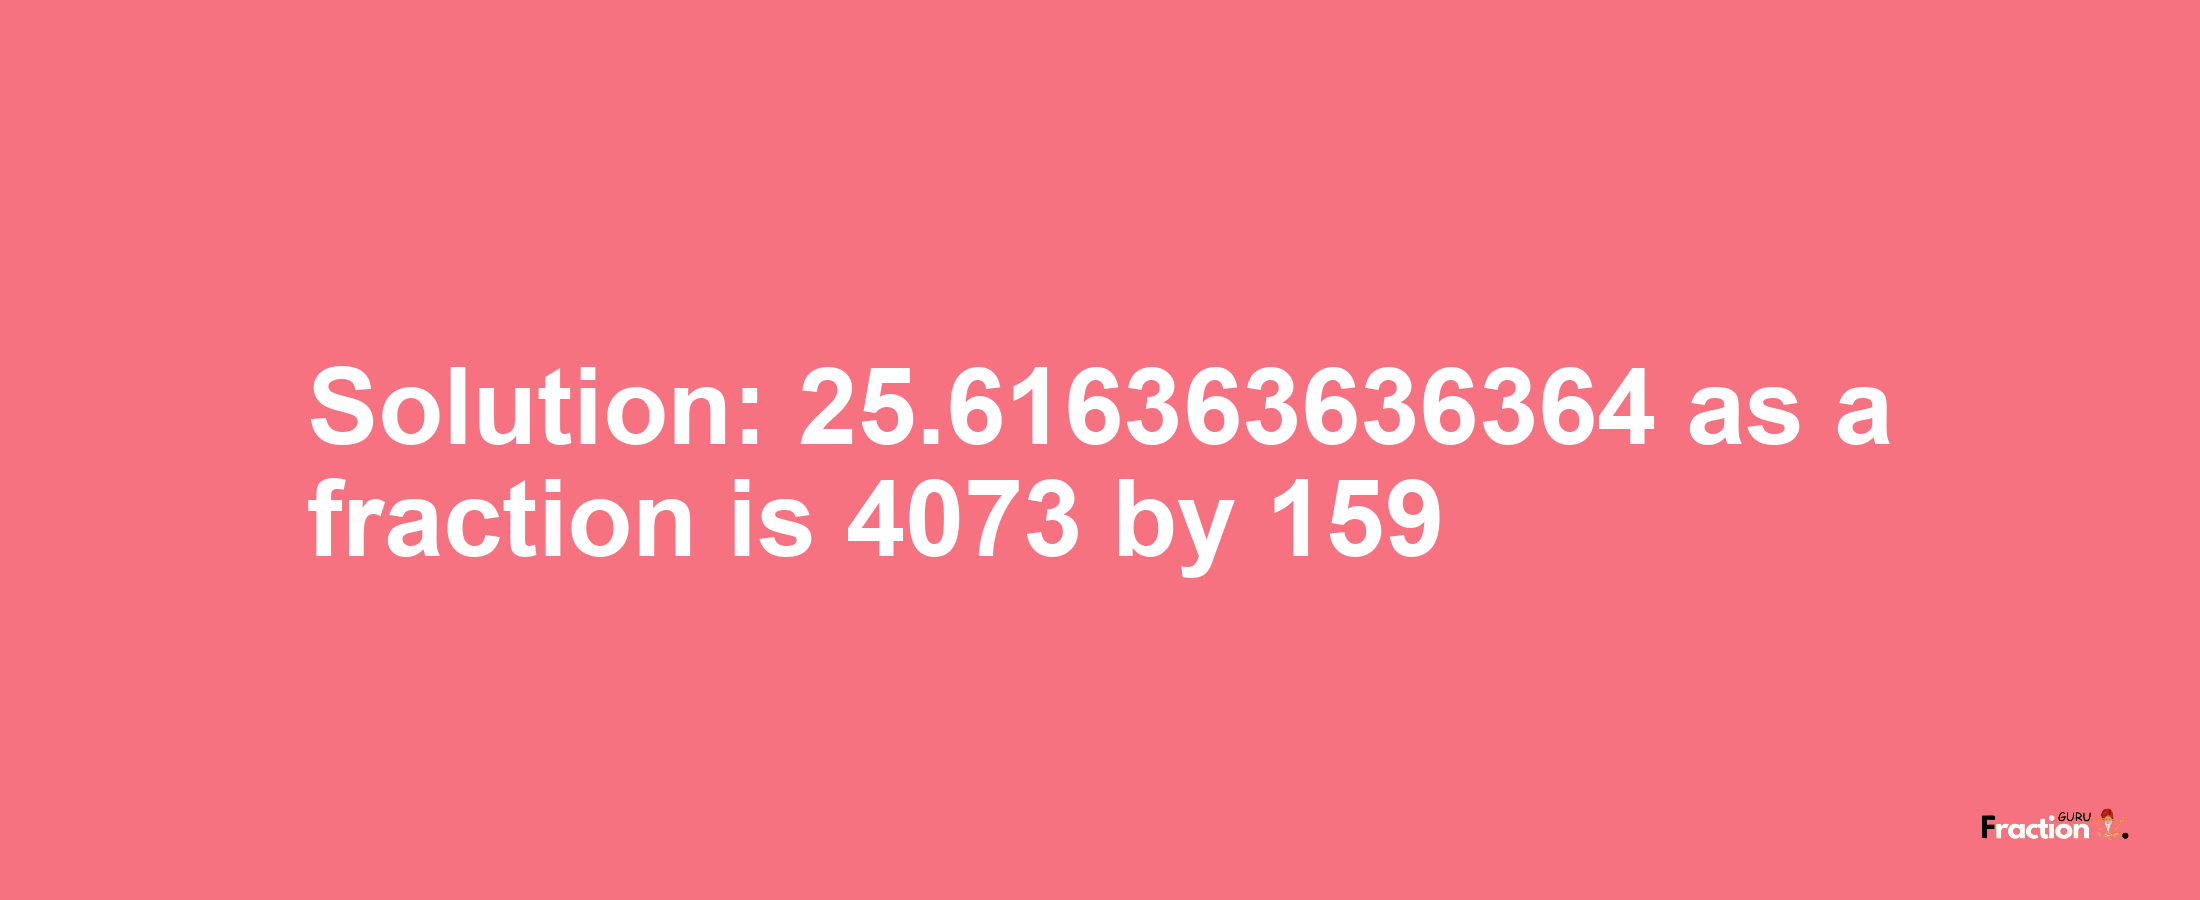 Solution:25.616363636364 as a fraction is 4073/159